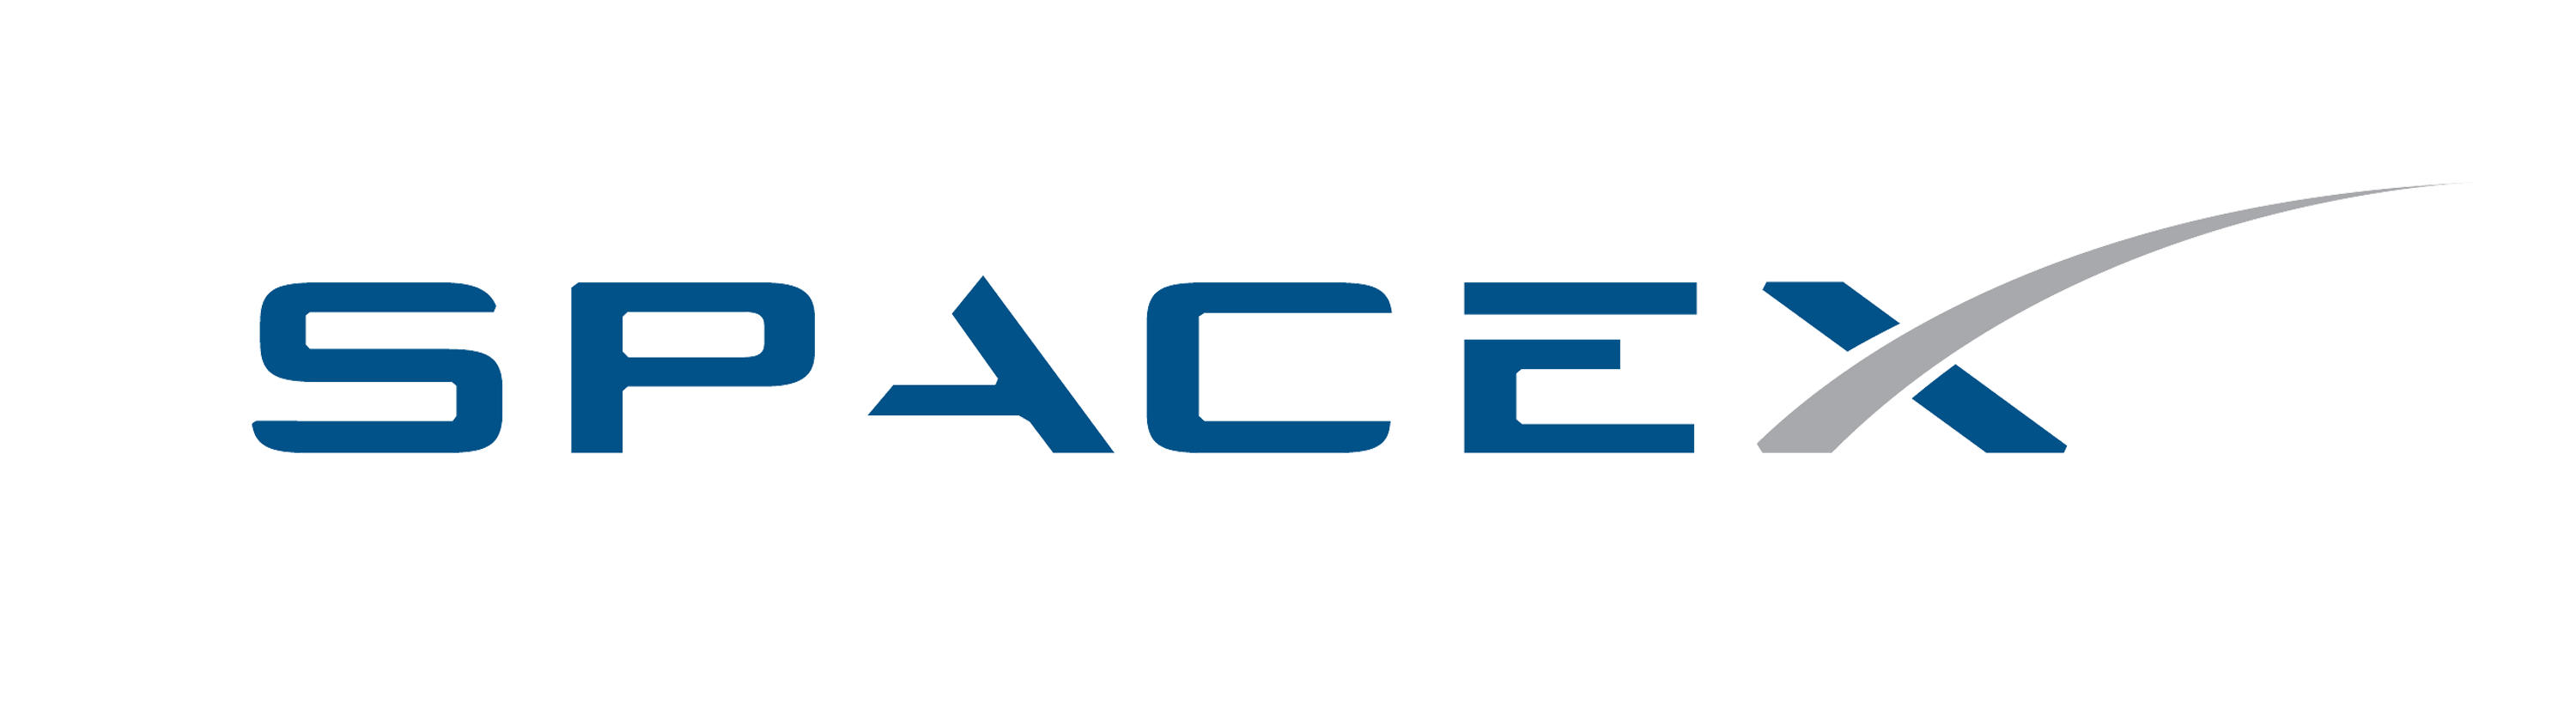 College of engineering SpaceX logo